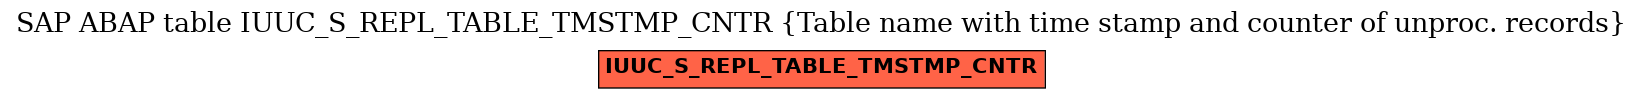 E-R Diagram for table IUUC_S_REPL_TABLE_TMSTMP_CNTR (Table name with time stamp and counter of unproc. records)